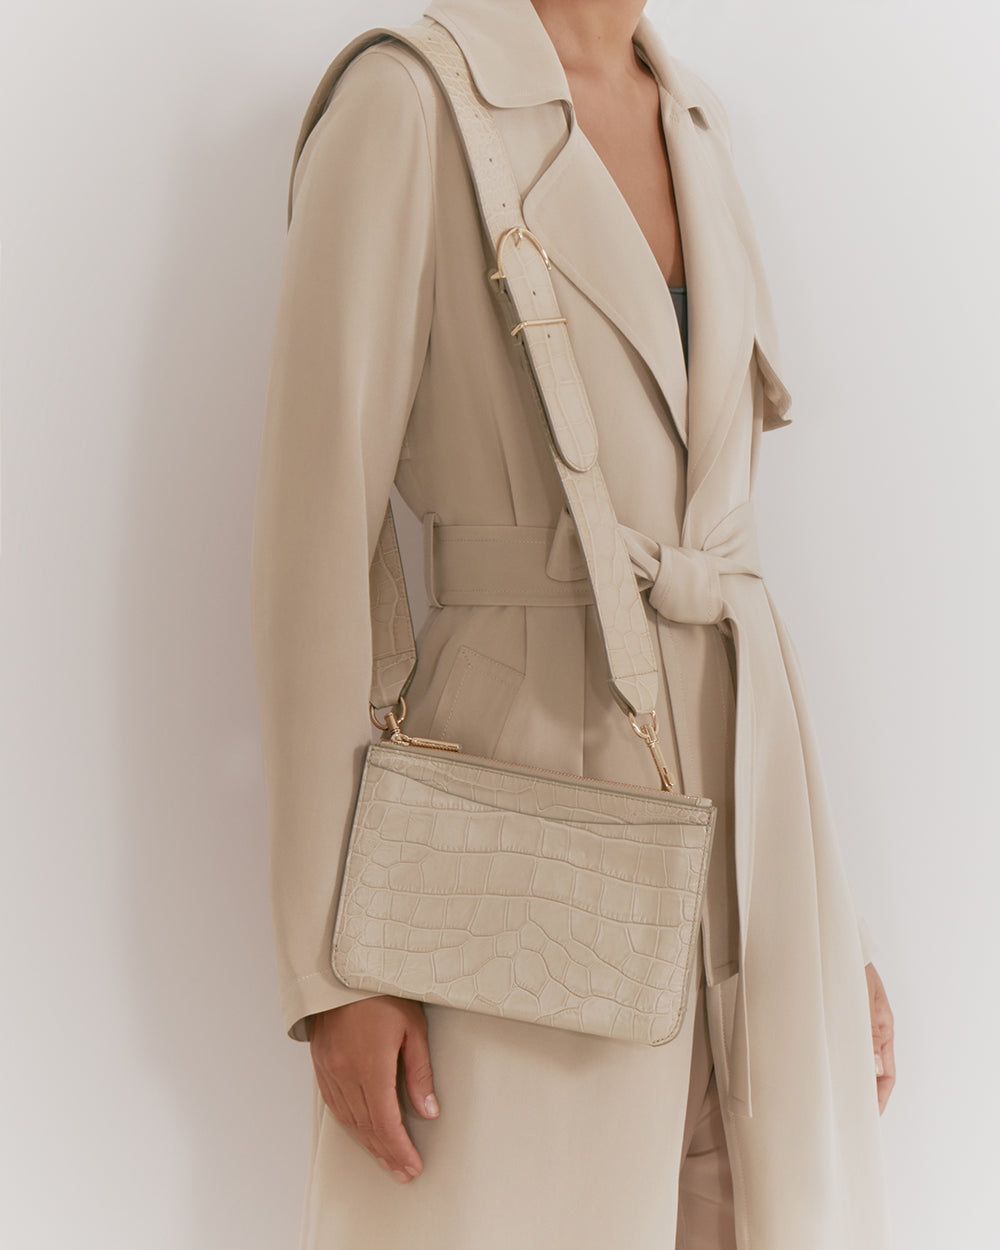 Woman wearing a trench coat carrying a shoulder bag.